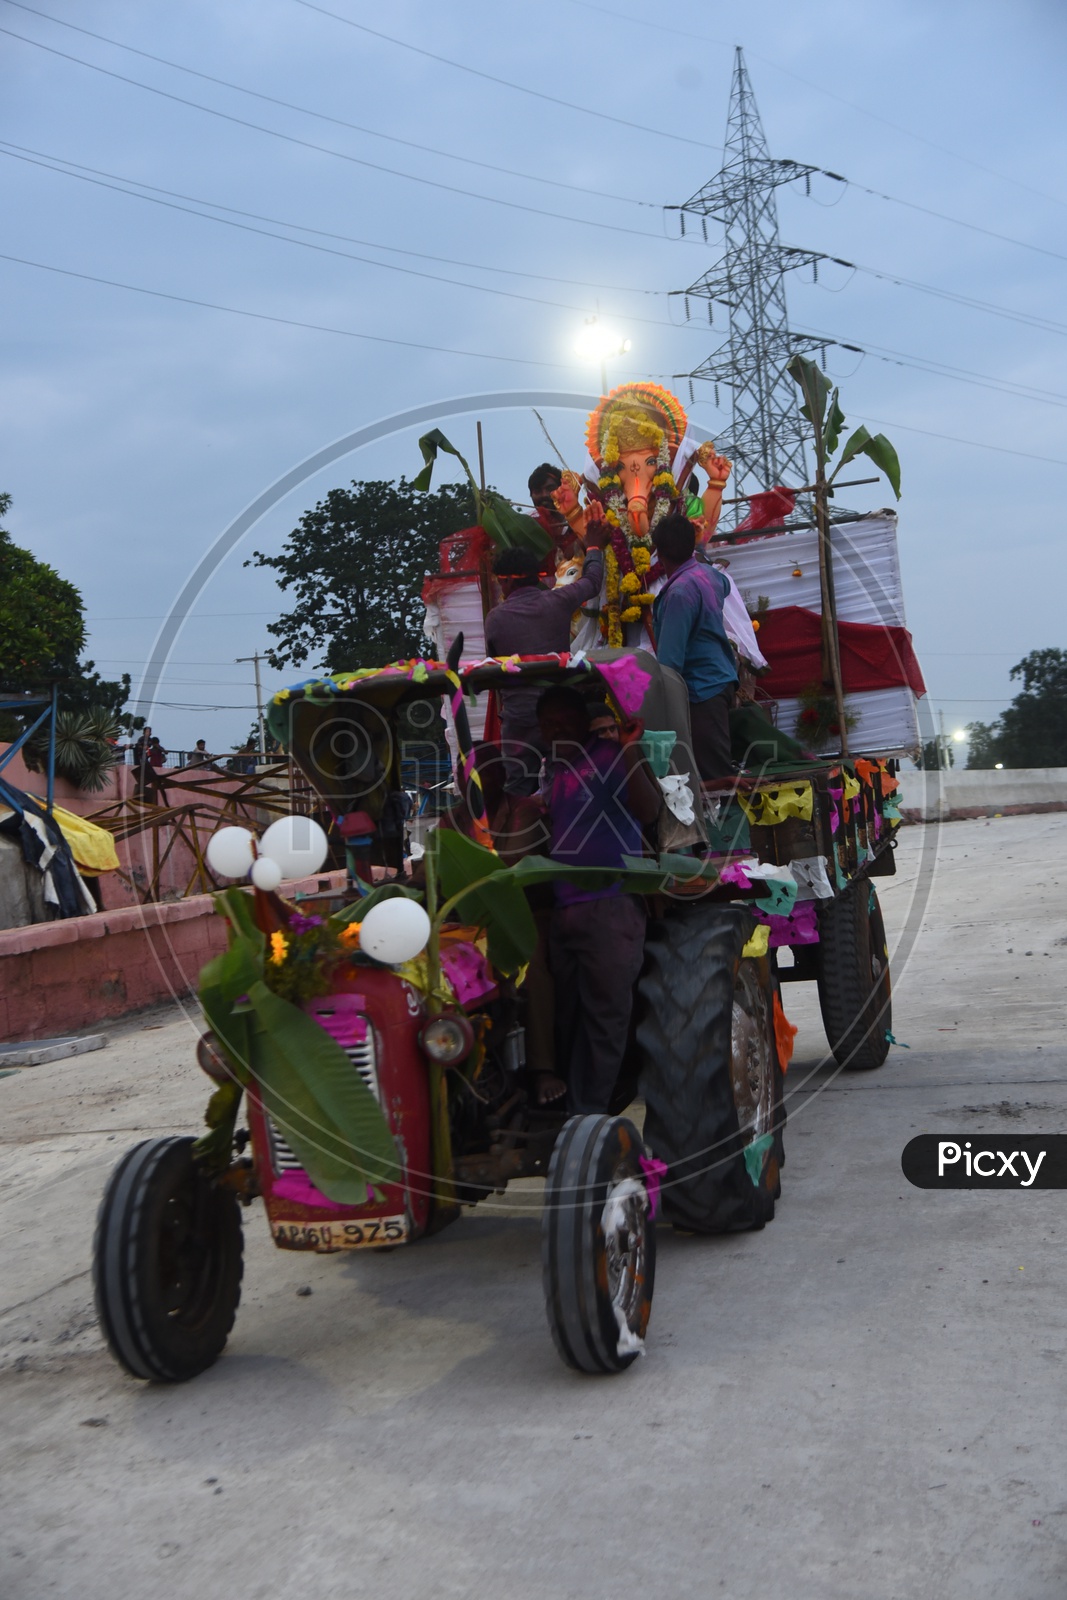 Ganesha Idol being carried on the tractor